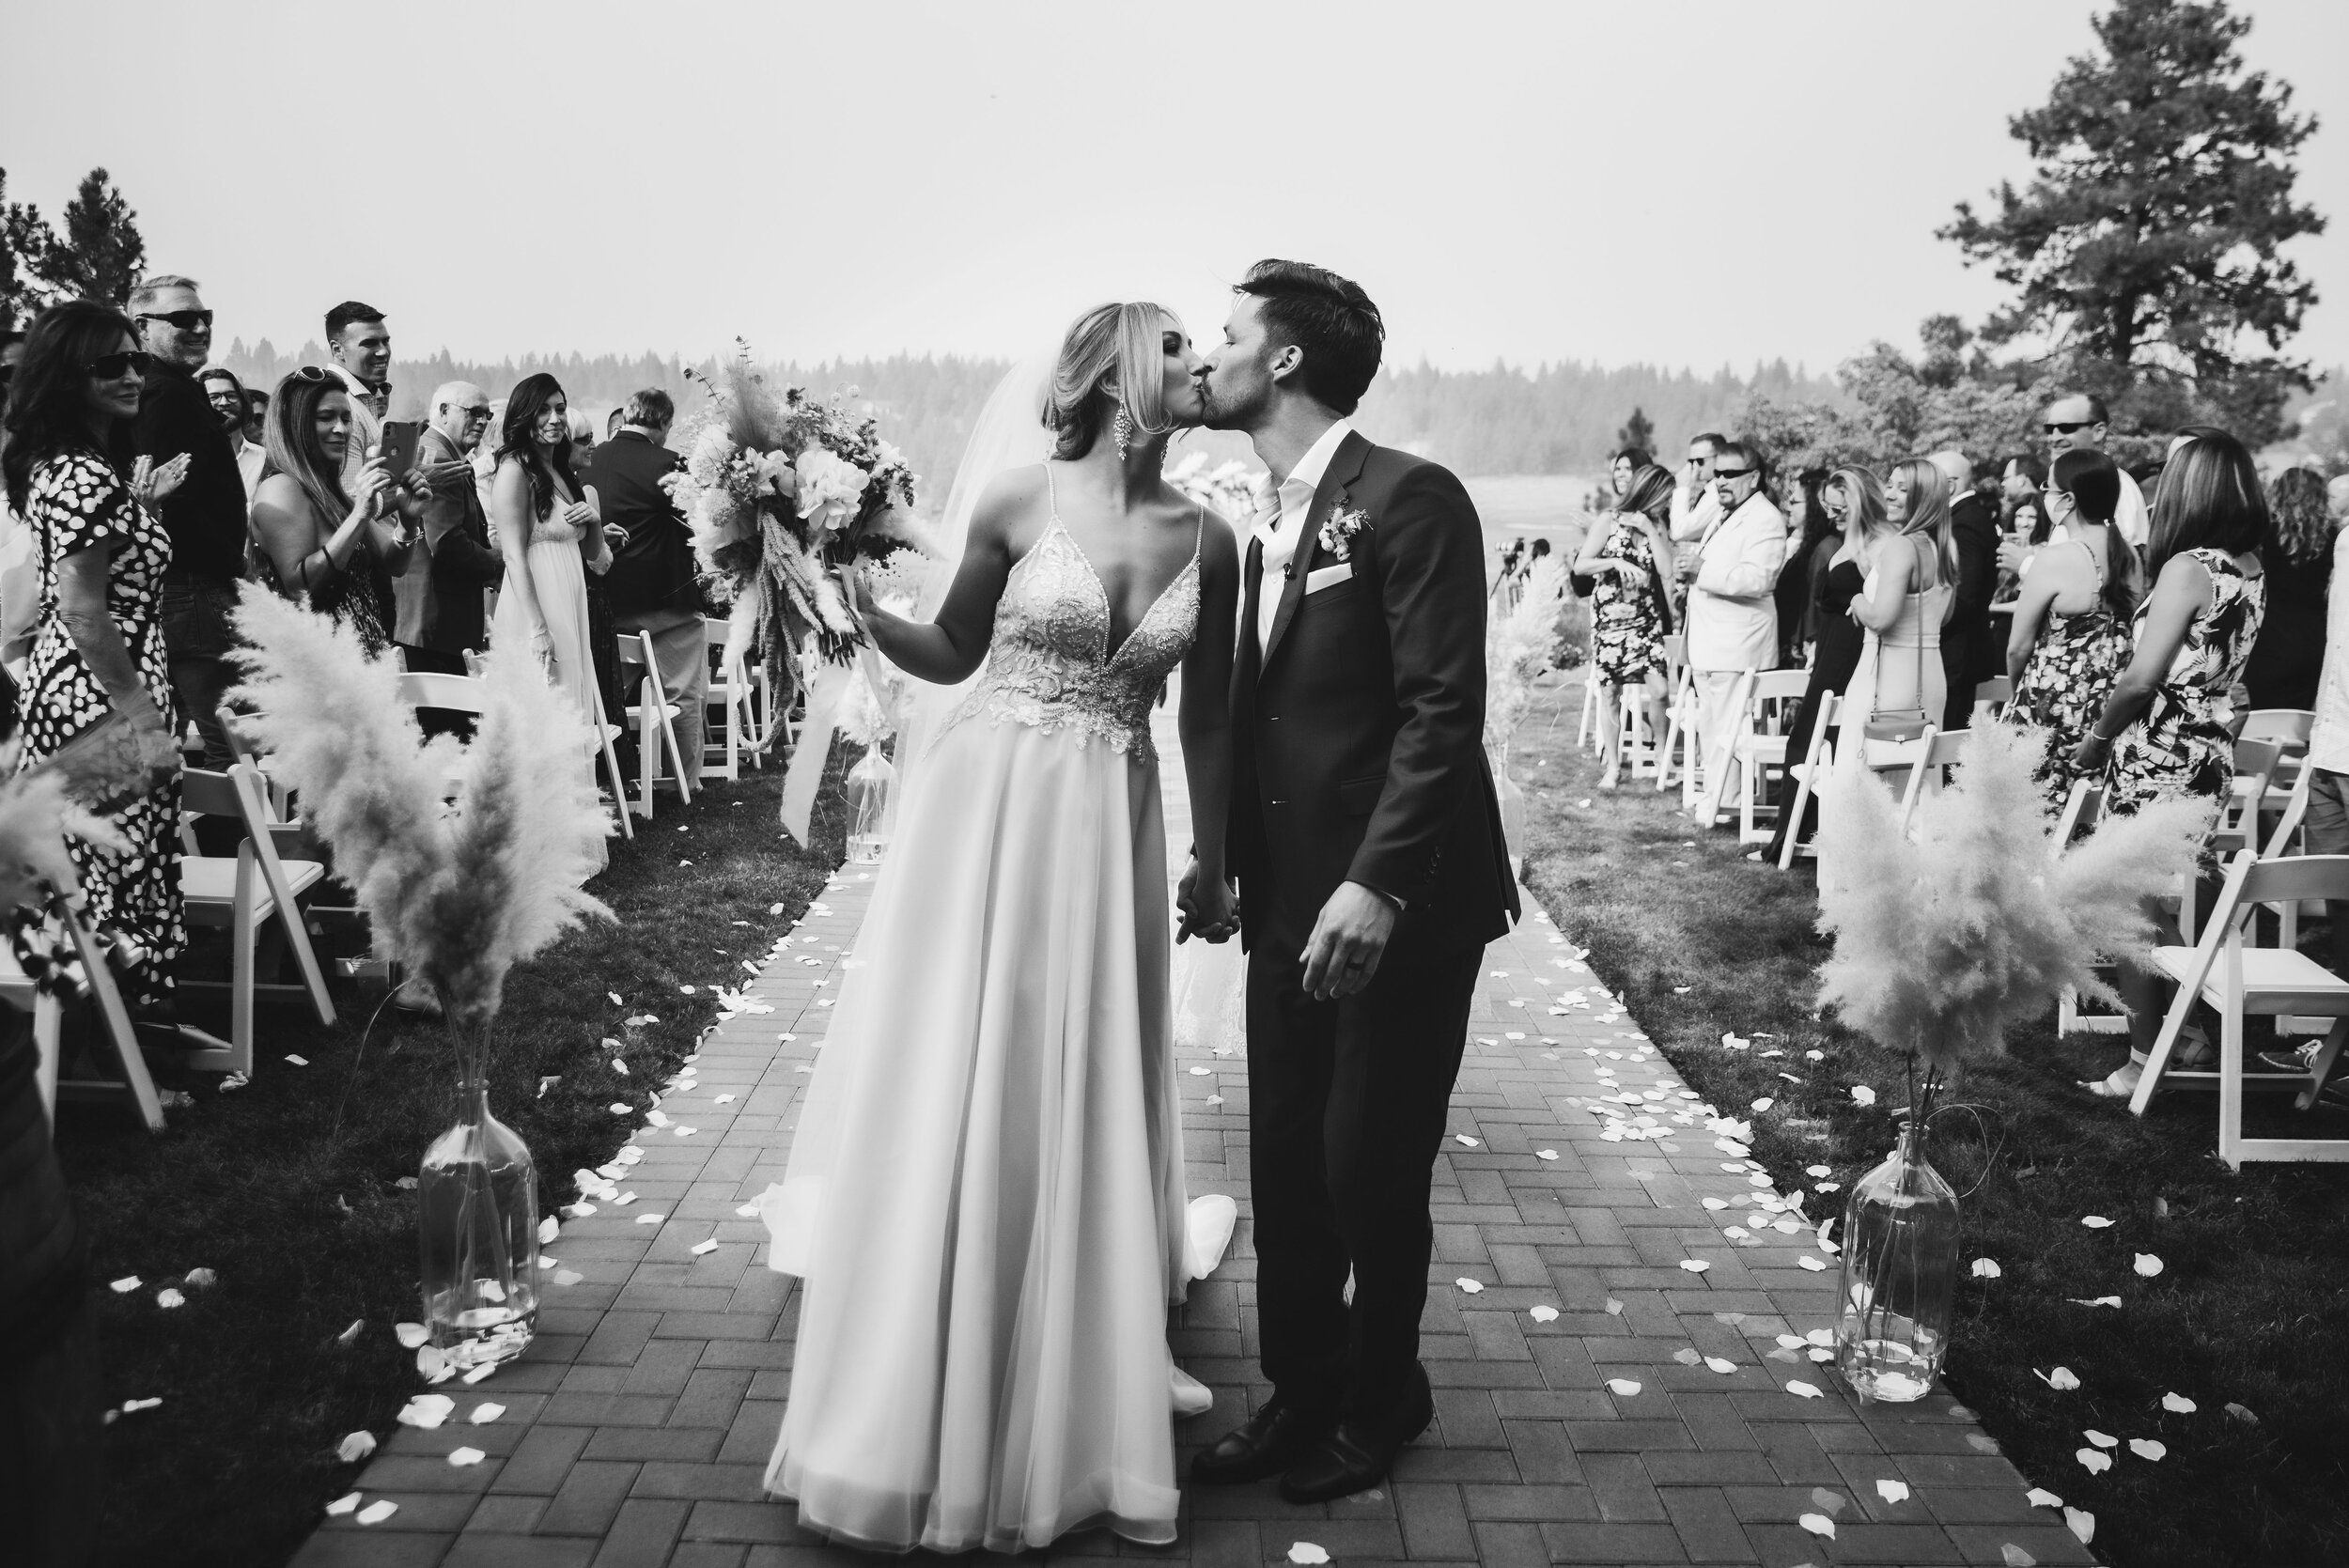 Bride and groom kiss walking back down aisle after wedding ceremony